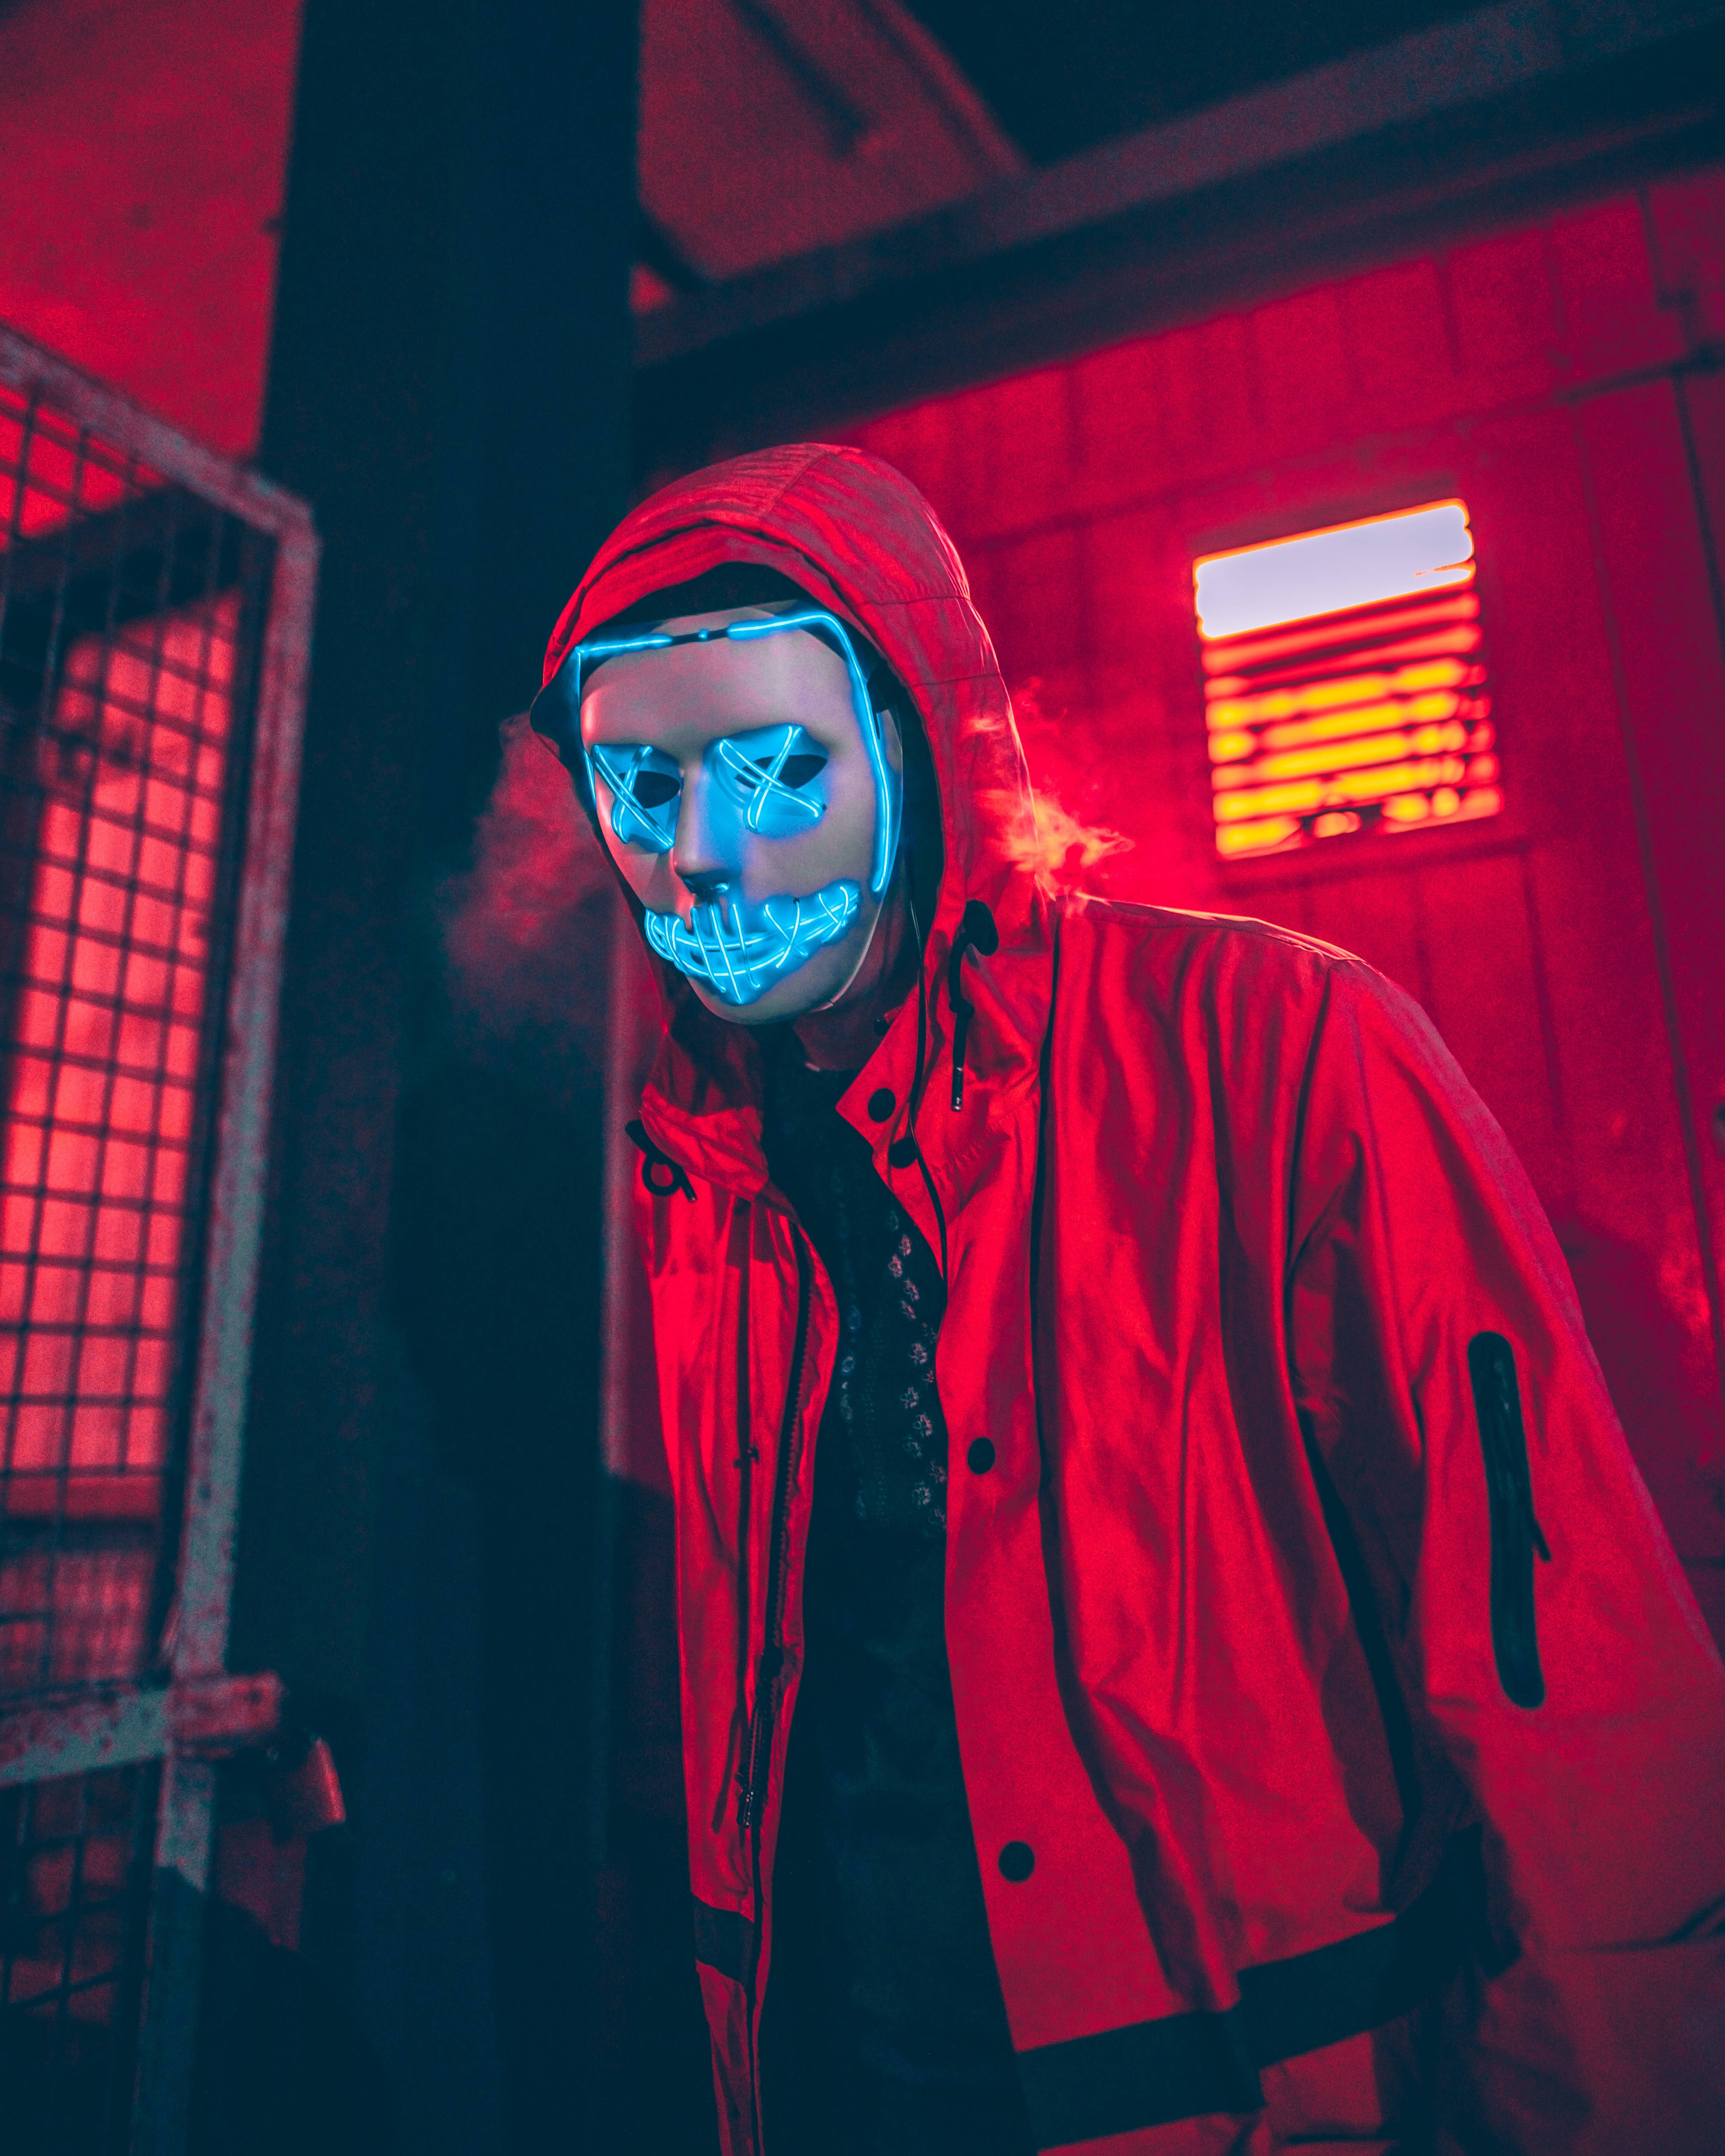 Neon Mask, Mask, Man, Hood, Red Background